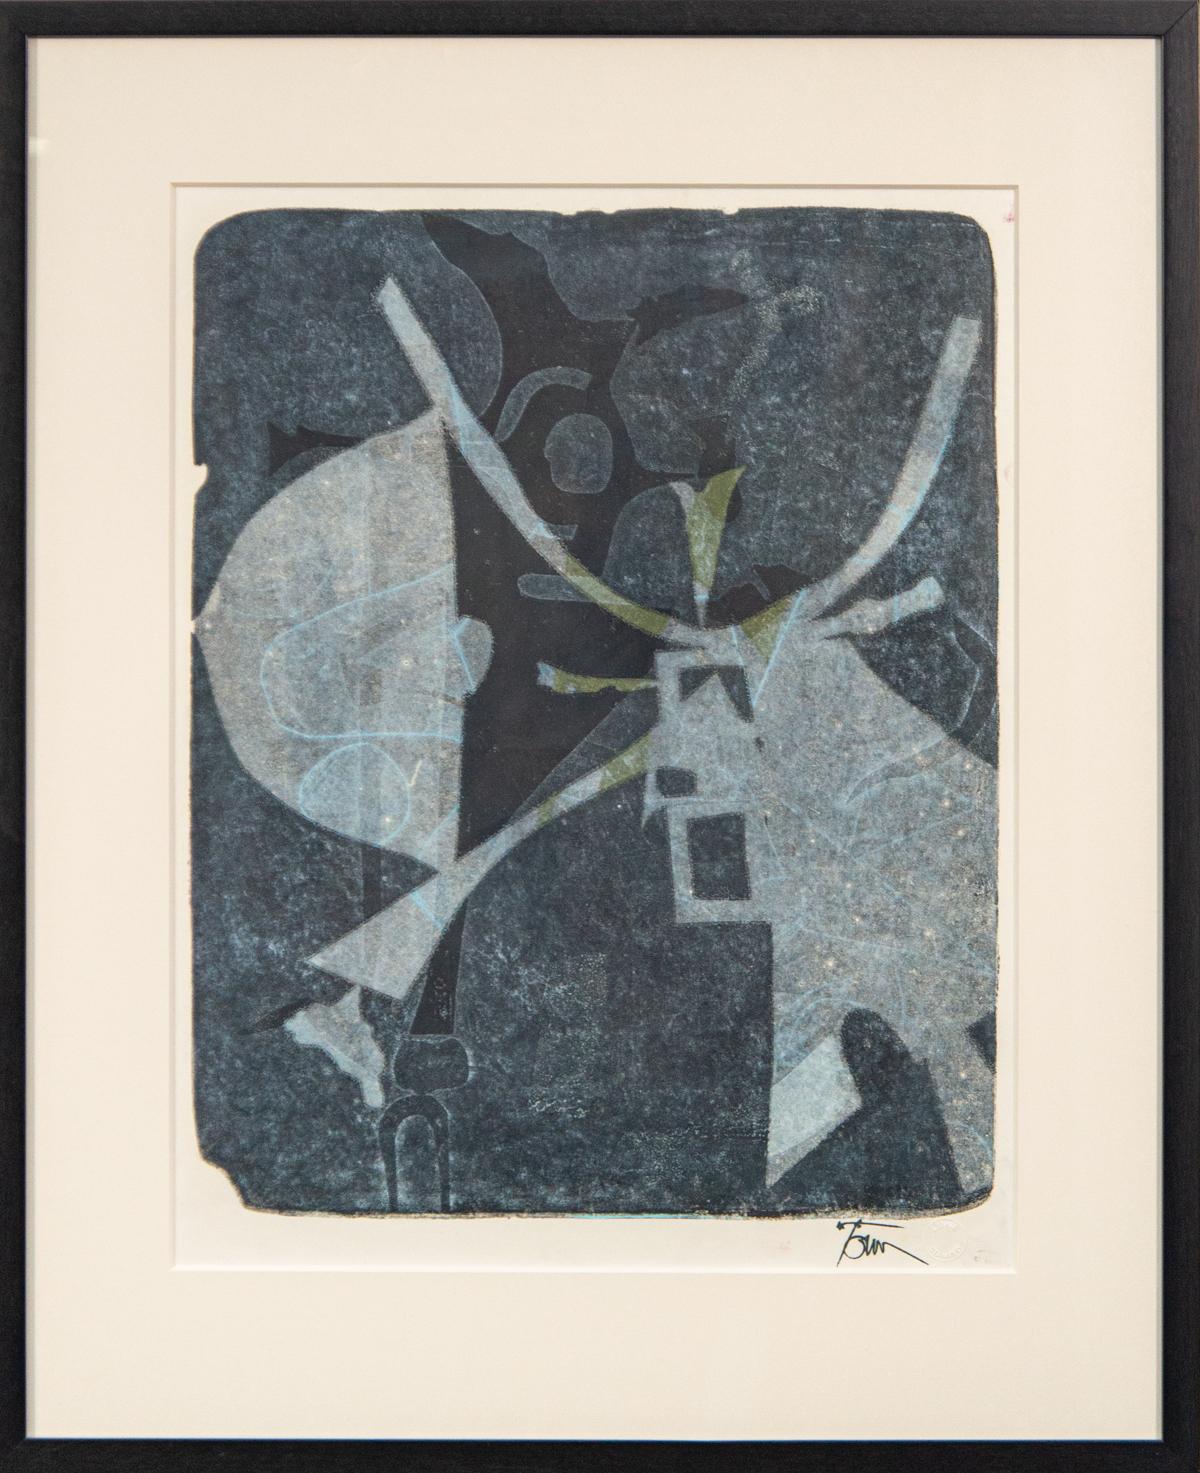 Untitled, 'Single Autographic Print' (1950s) - abstract, framed, monoprint